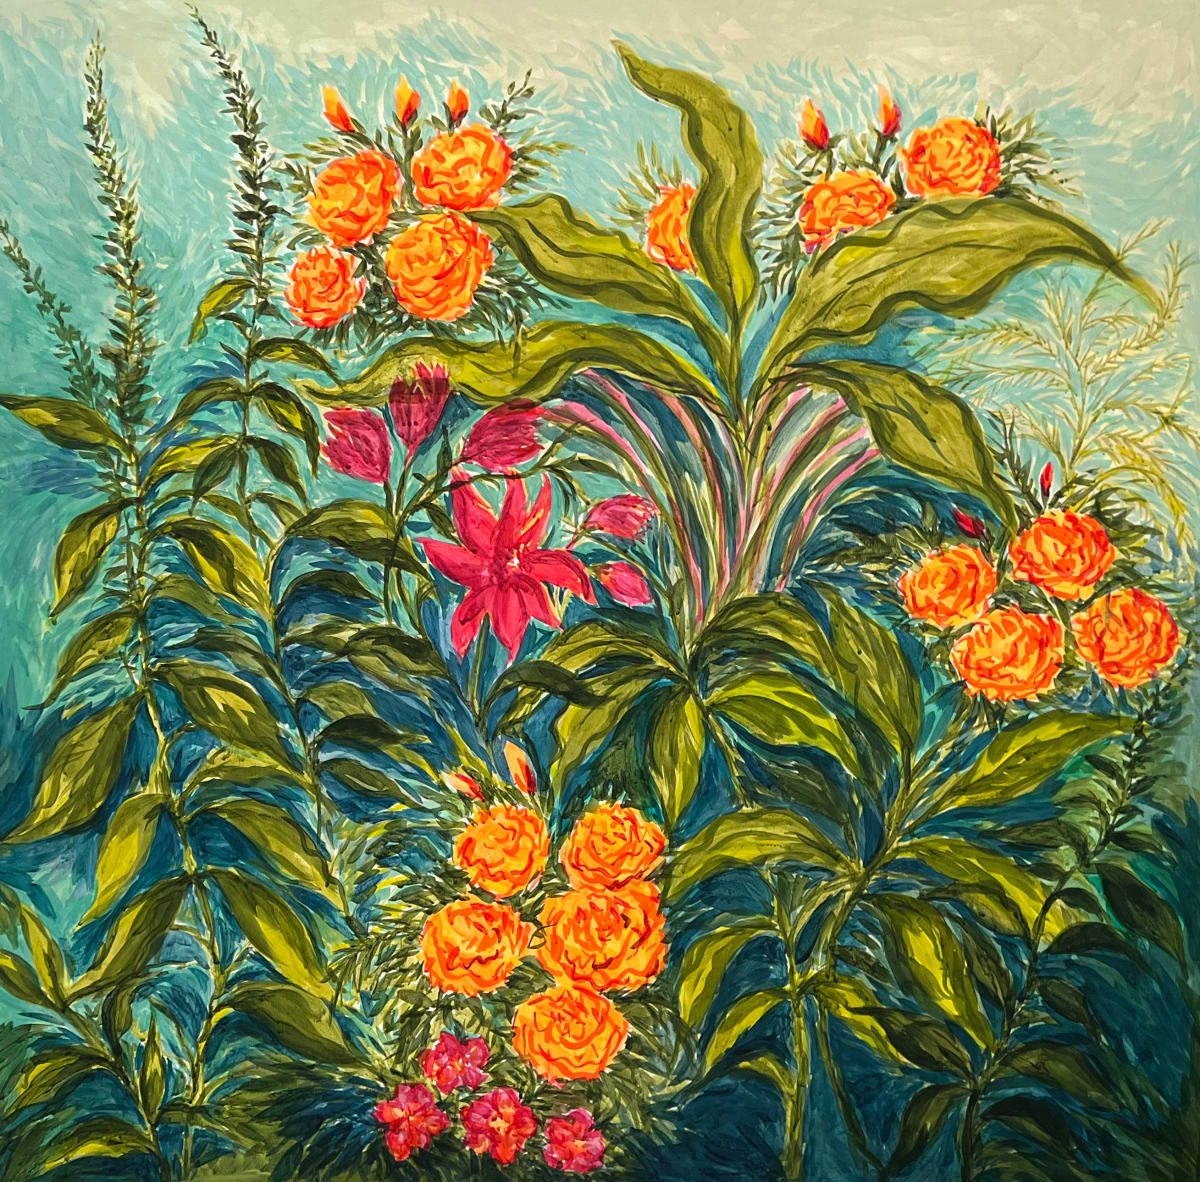 Dance of the Marigolds by Christopher Roch 